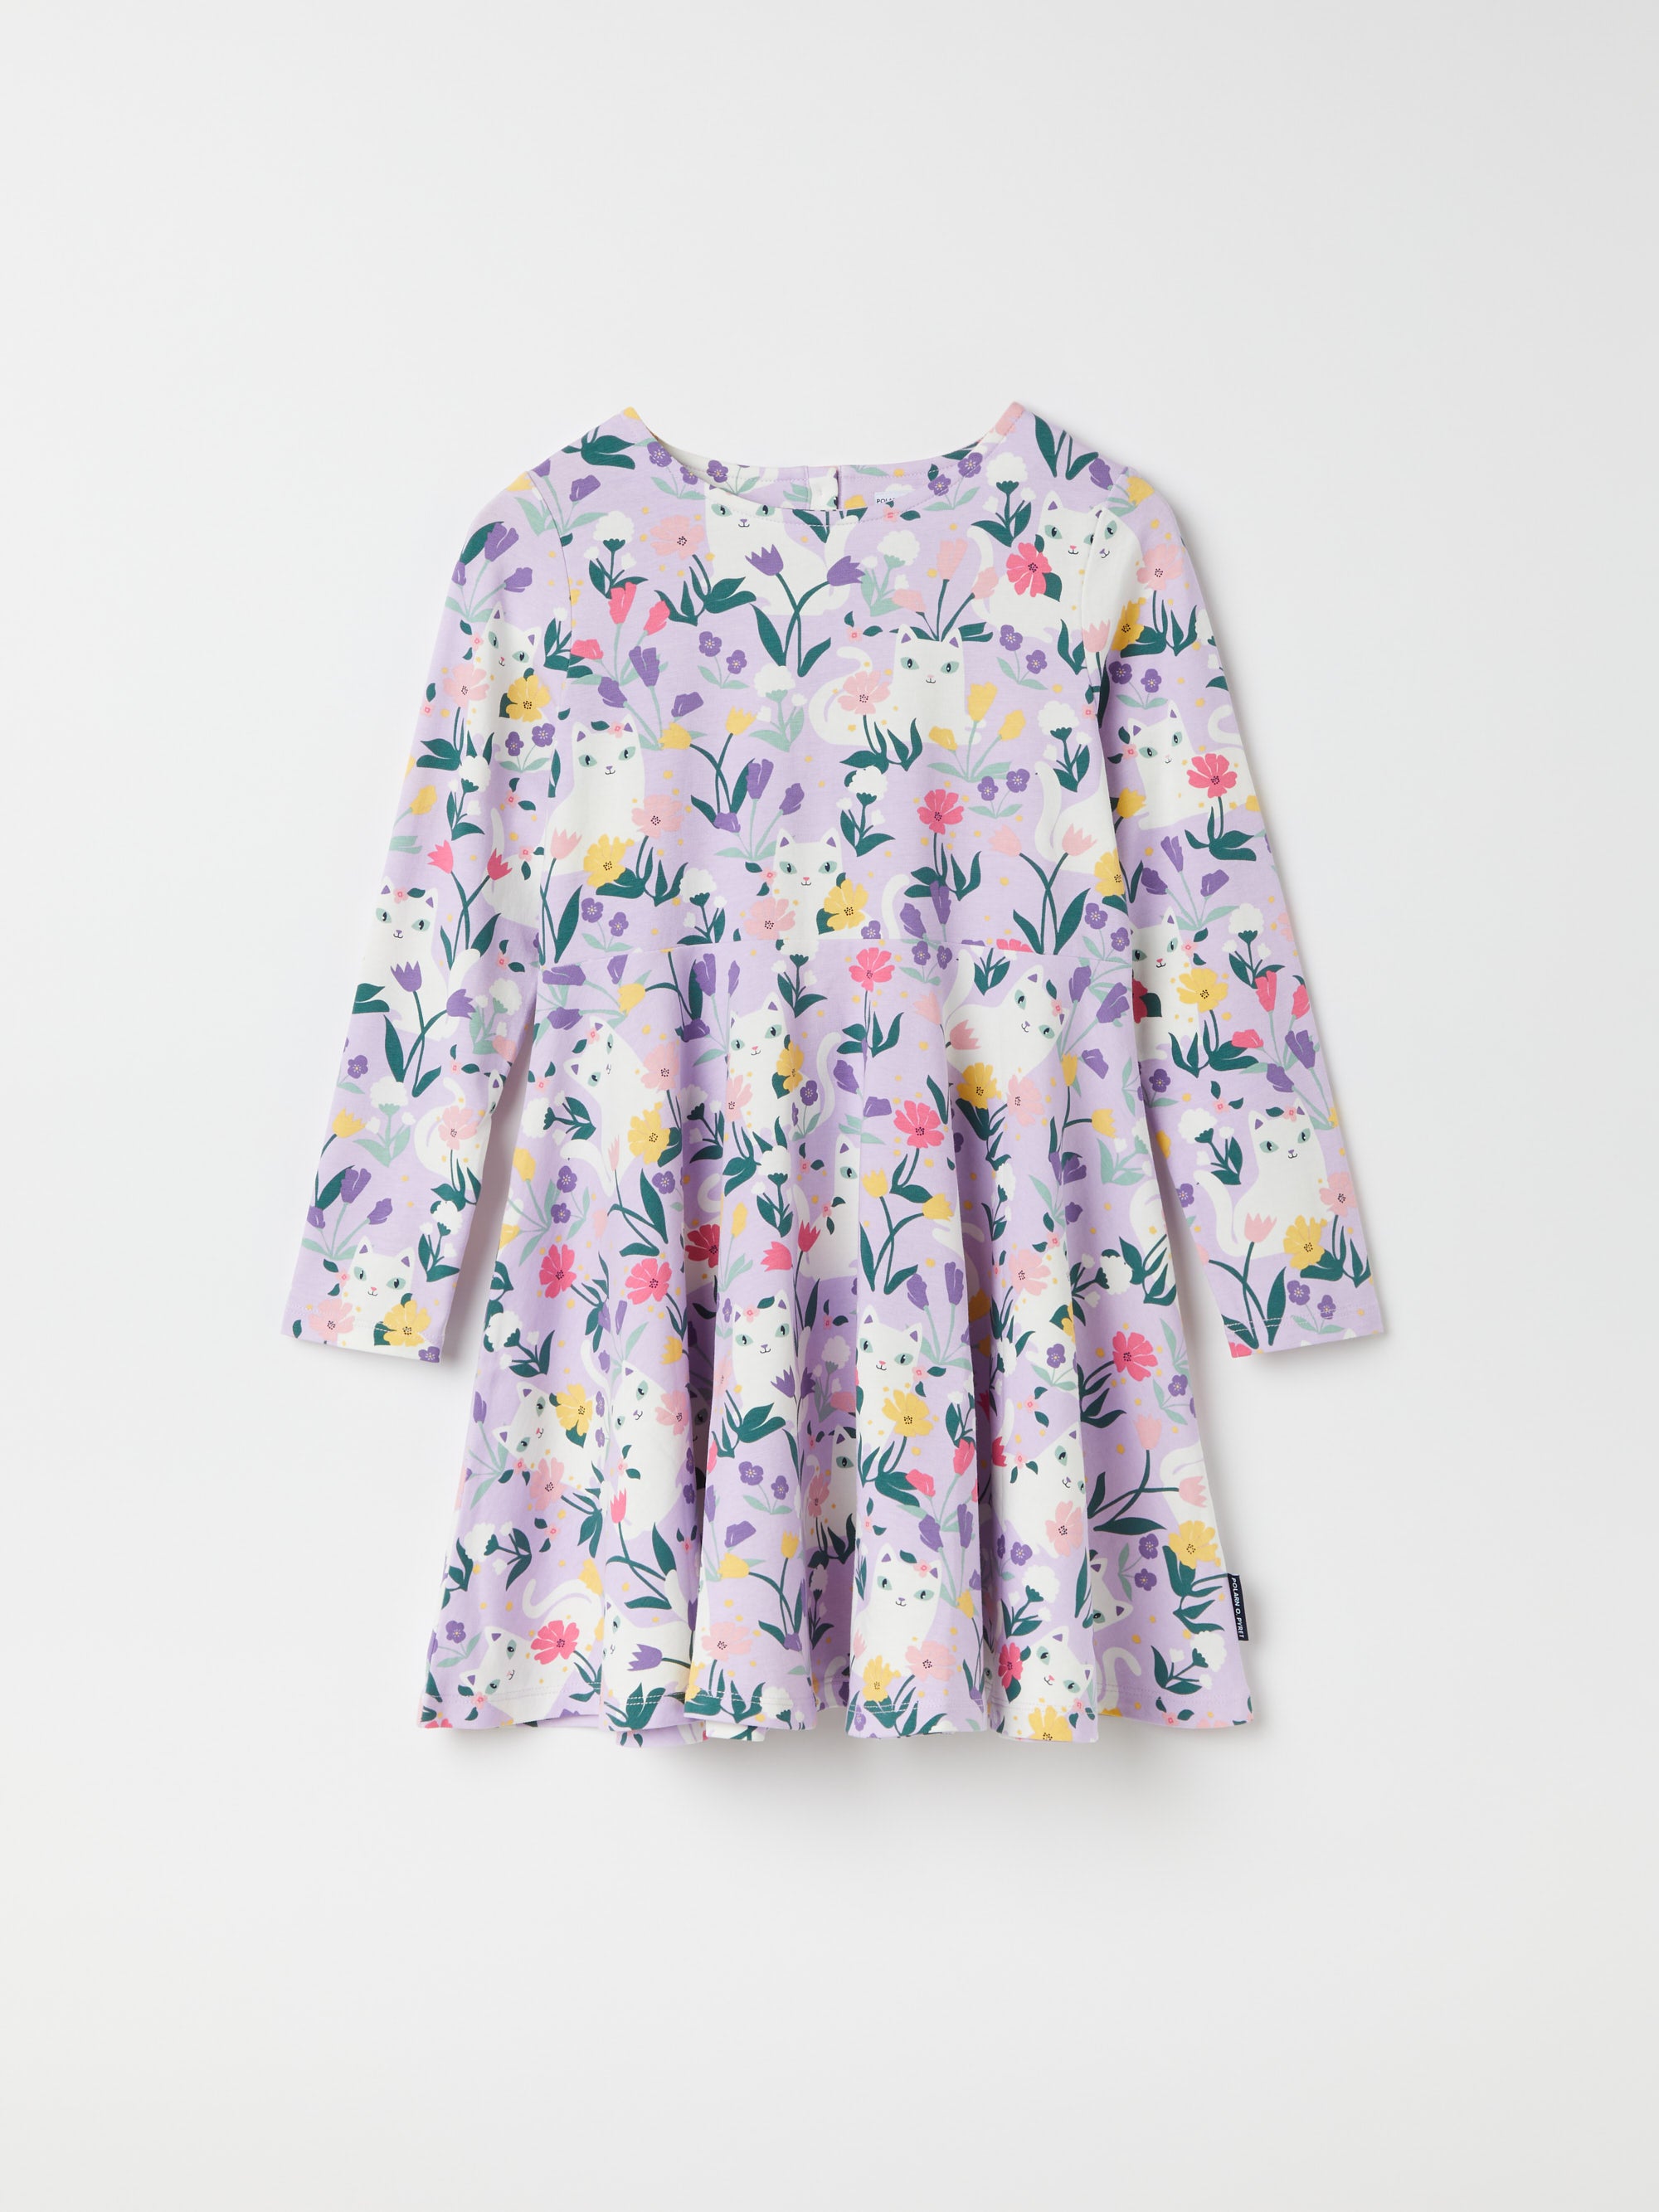 Cats and Flowers Kids Dress